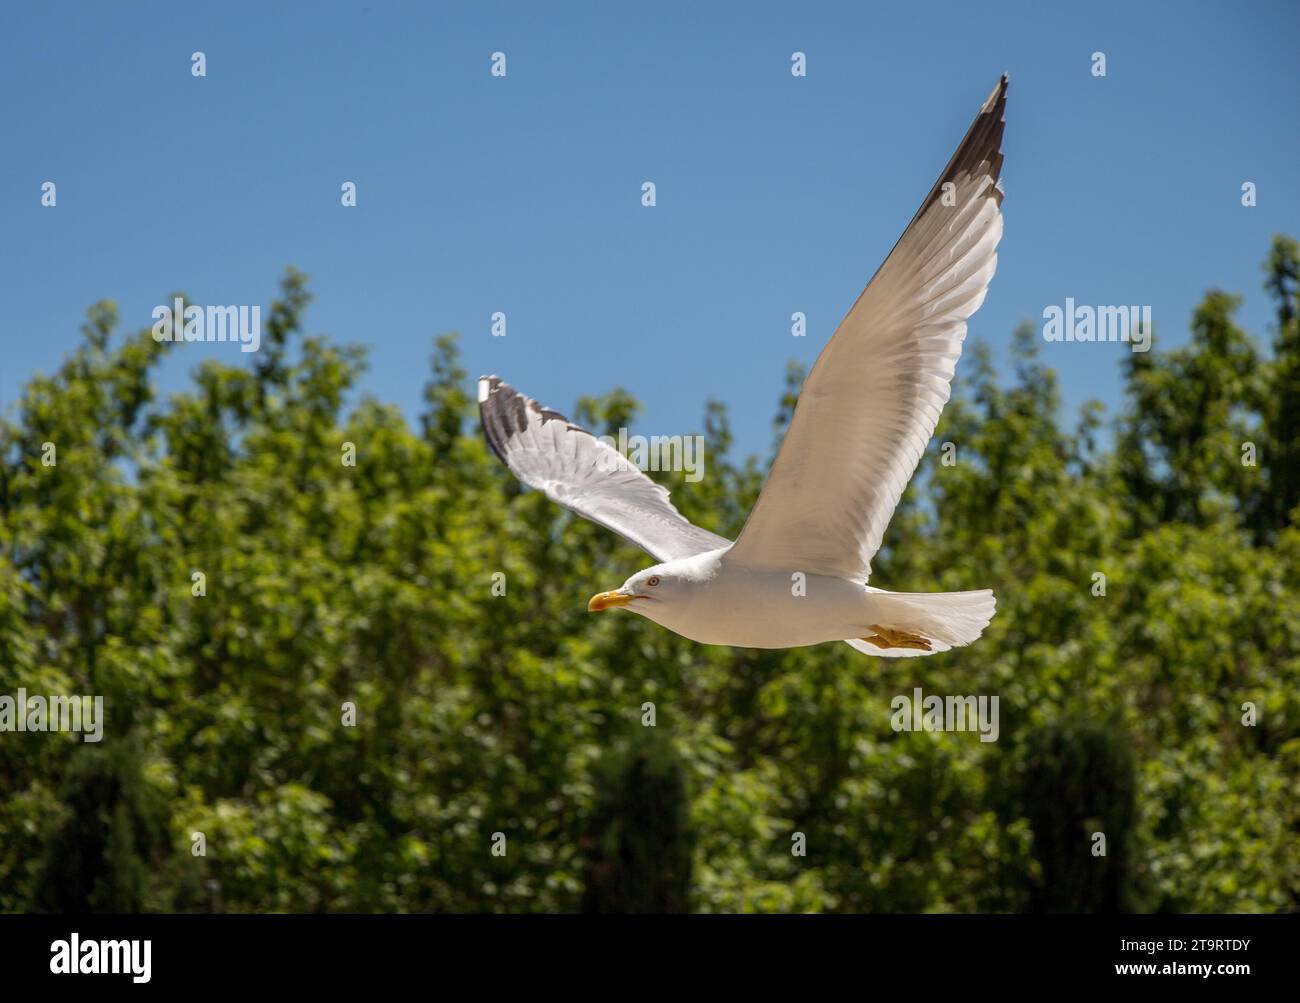 Seagull flying over the trees in the garden Stock Photo